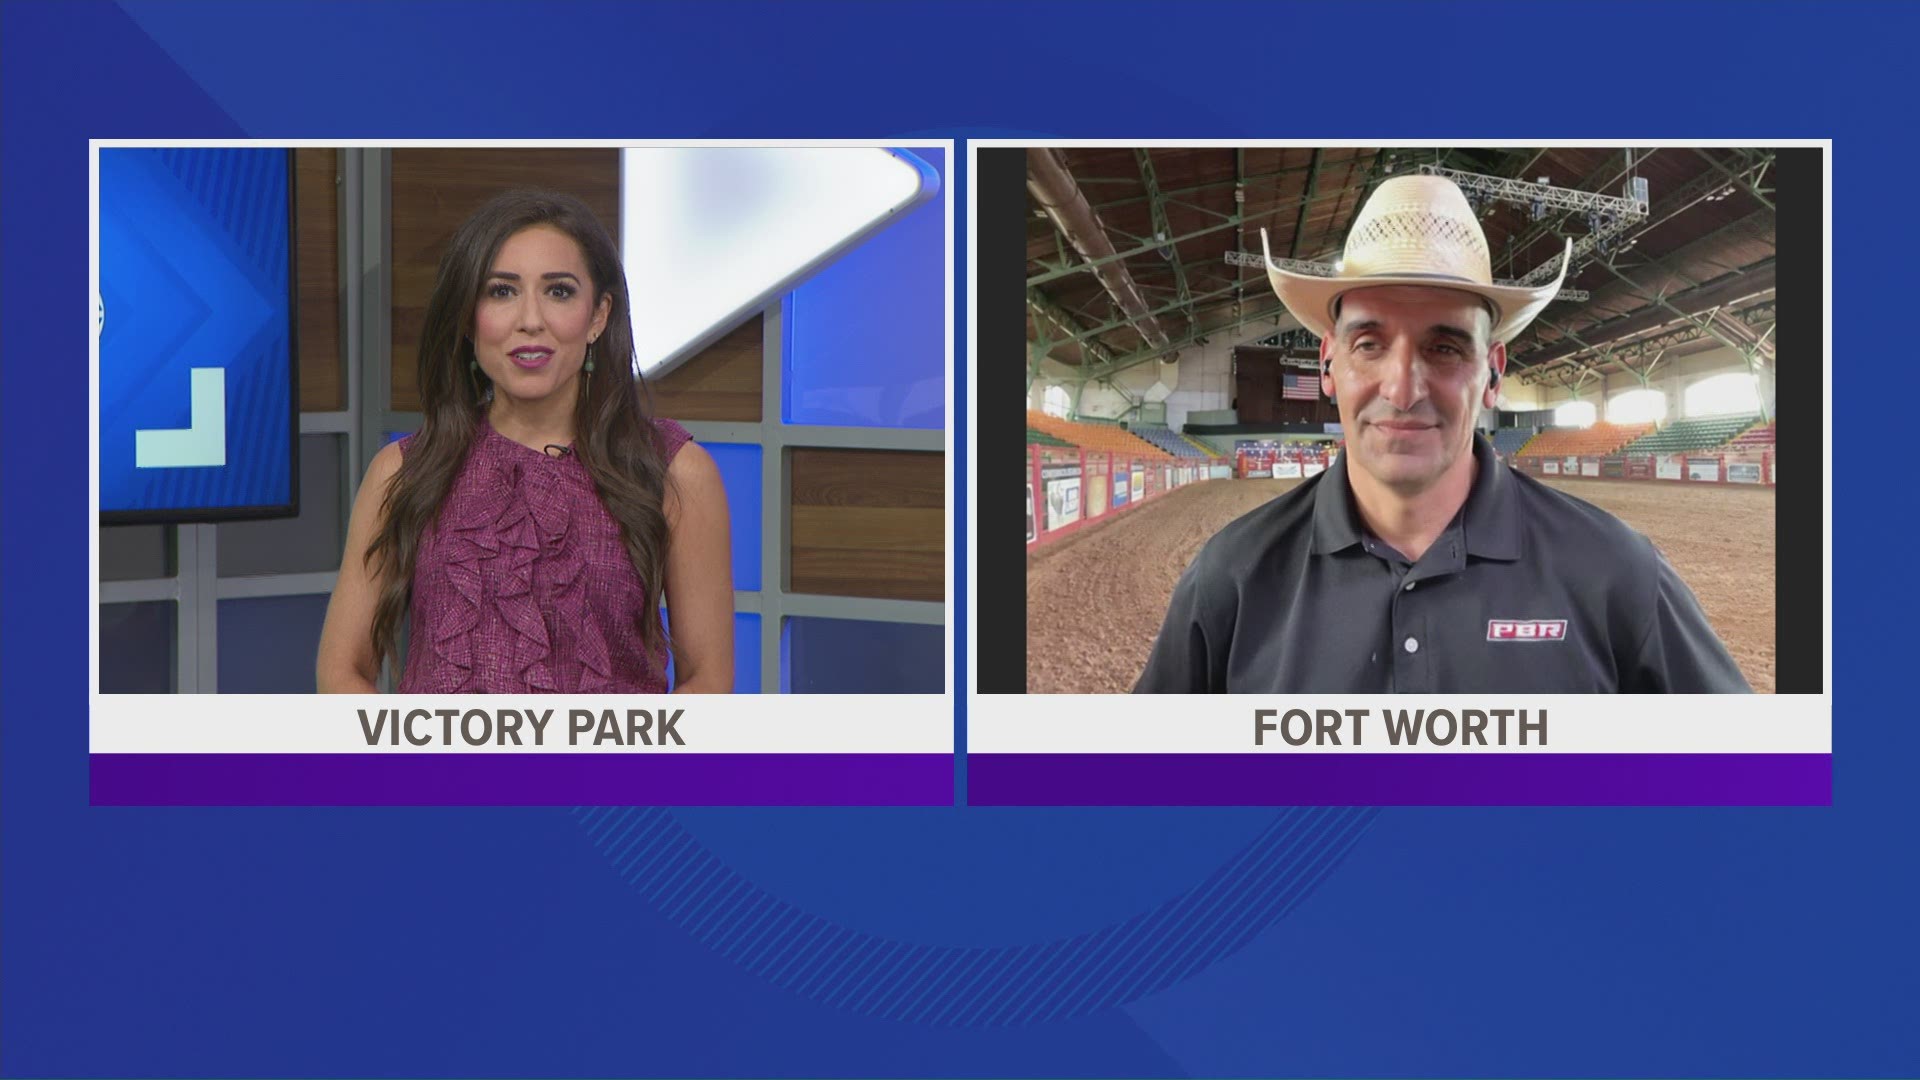 The PBR said a goal of the partnership is to make the Fort Worth Stockyards a global epicenter for the western lifestyle.